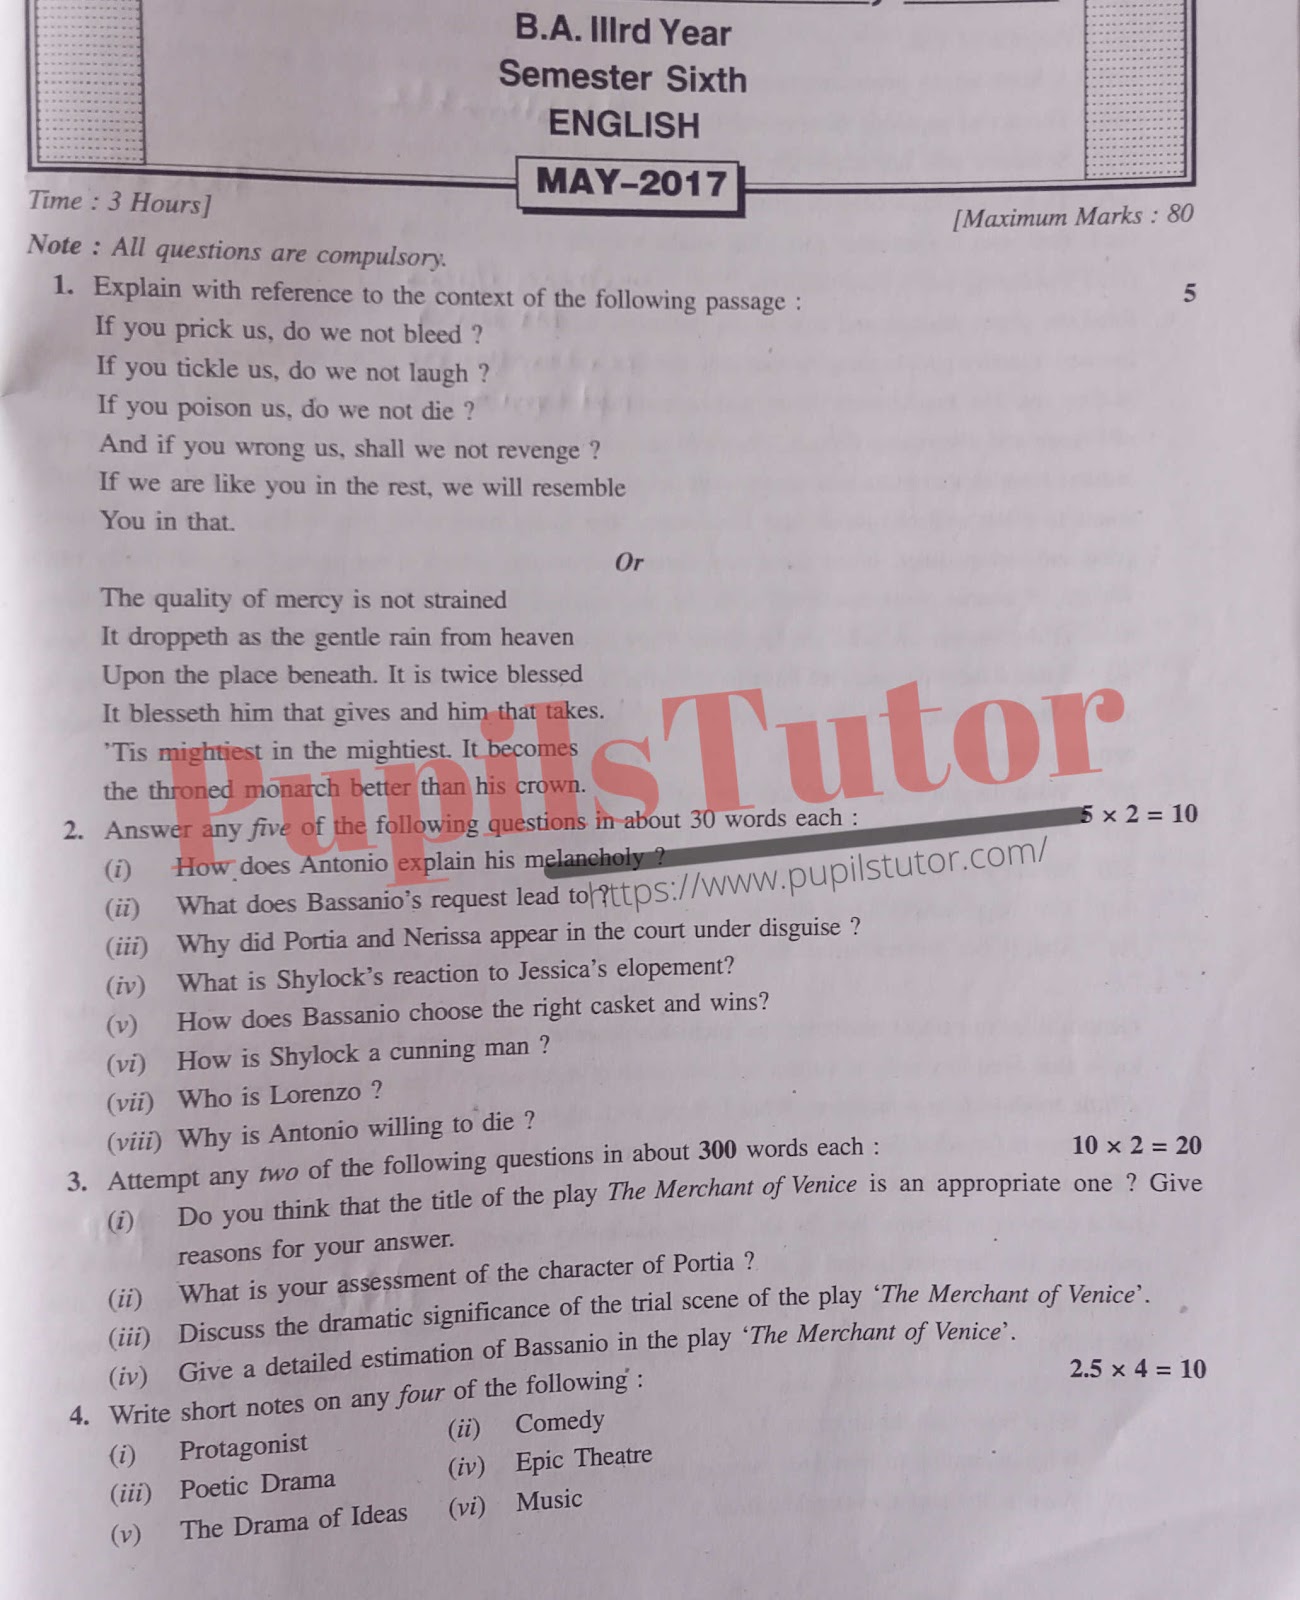 CDLU (Chaudhary Devi Lal University, Sirsa Haryana) BA Semester Exam Sixth Semester Previous Year English Question Paper For May, 2017 Exam (Question Paper Page 1) - pupilstutor.com